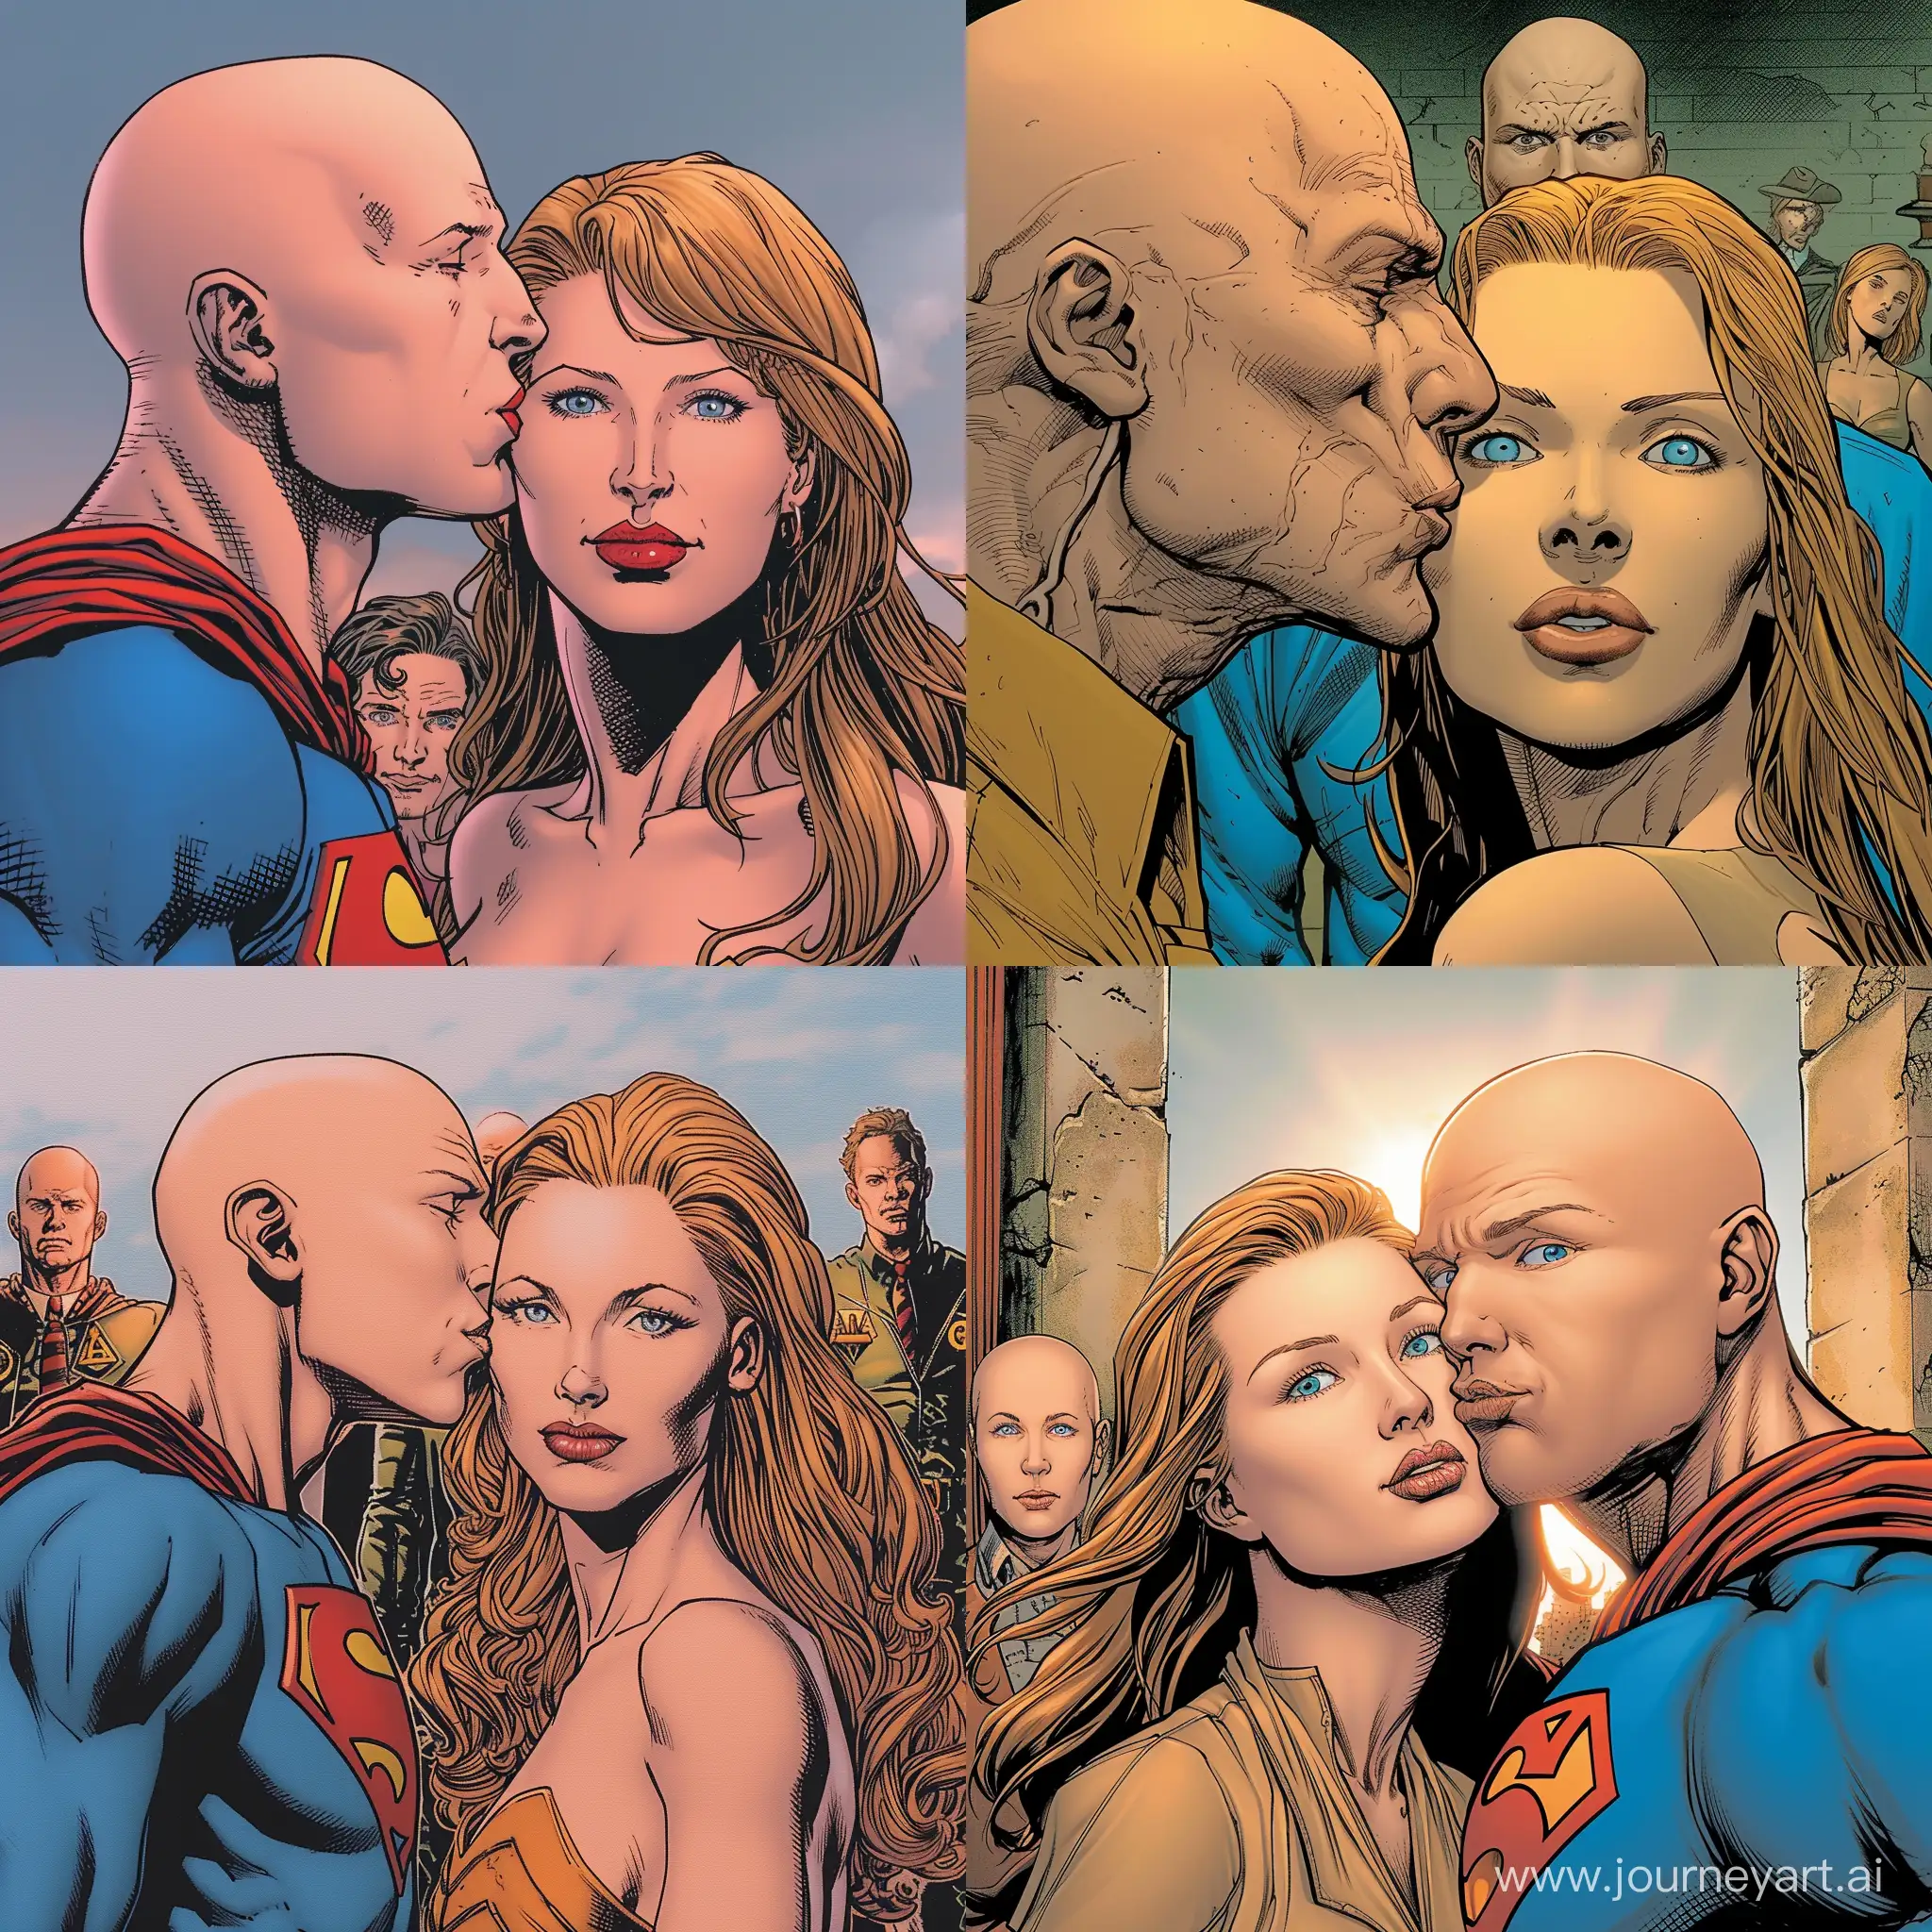 Lex Luthor, portrayed by Michael Rosenbaum, bald kissing a woman . The woman has a light-medium golden complexion, a squared face shape, full lips, blue eyes, dirty blonde eyebrows arched toward the tail, a button nose, and long, straight strawberry blonde hair with wispy bangs. Meanwhile, Martha Kent , Jonathan Kent , Clark Kent , Lois Lane, Chloe Sullivan, and Kara Zor-El  are all watching in horror.